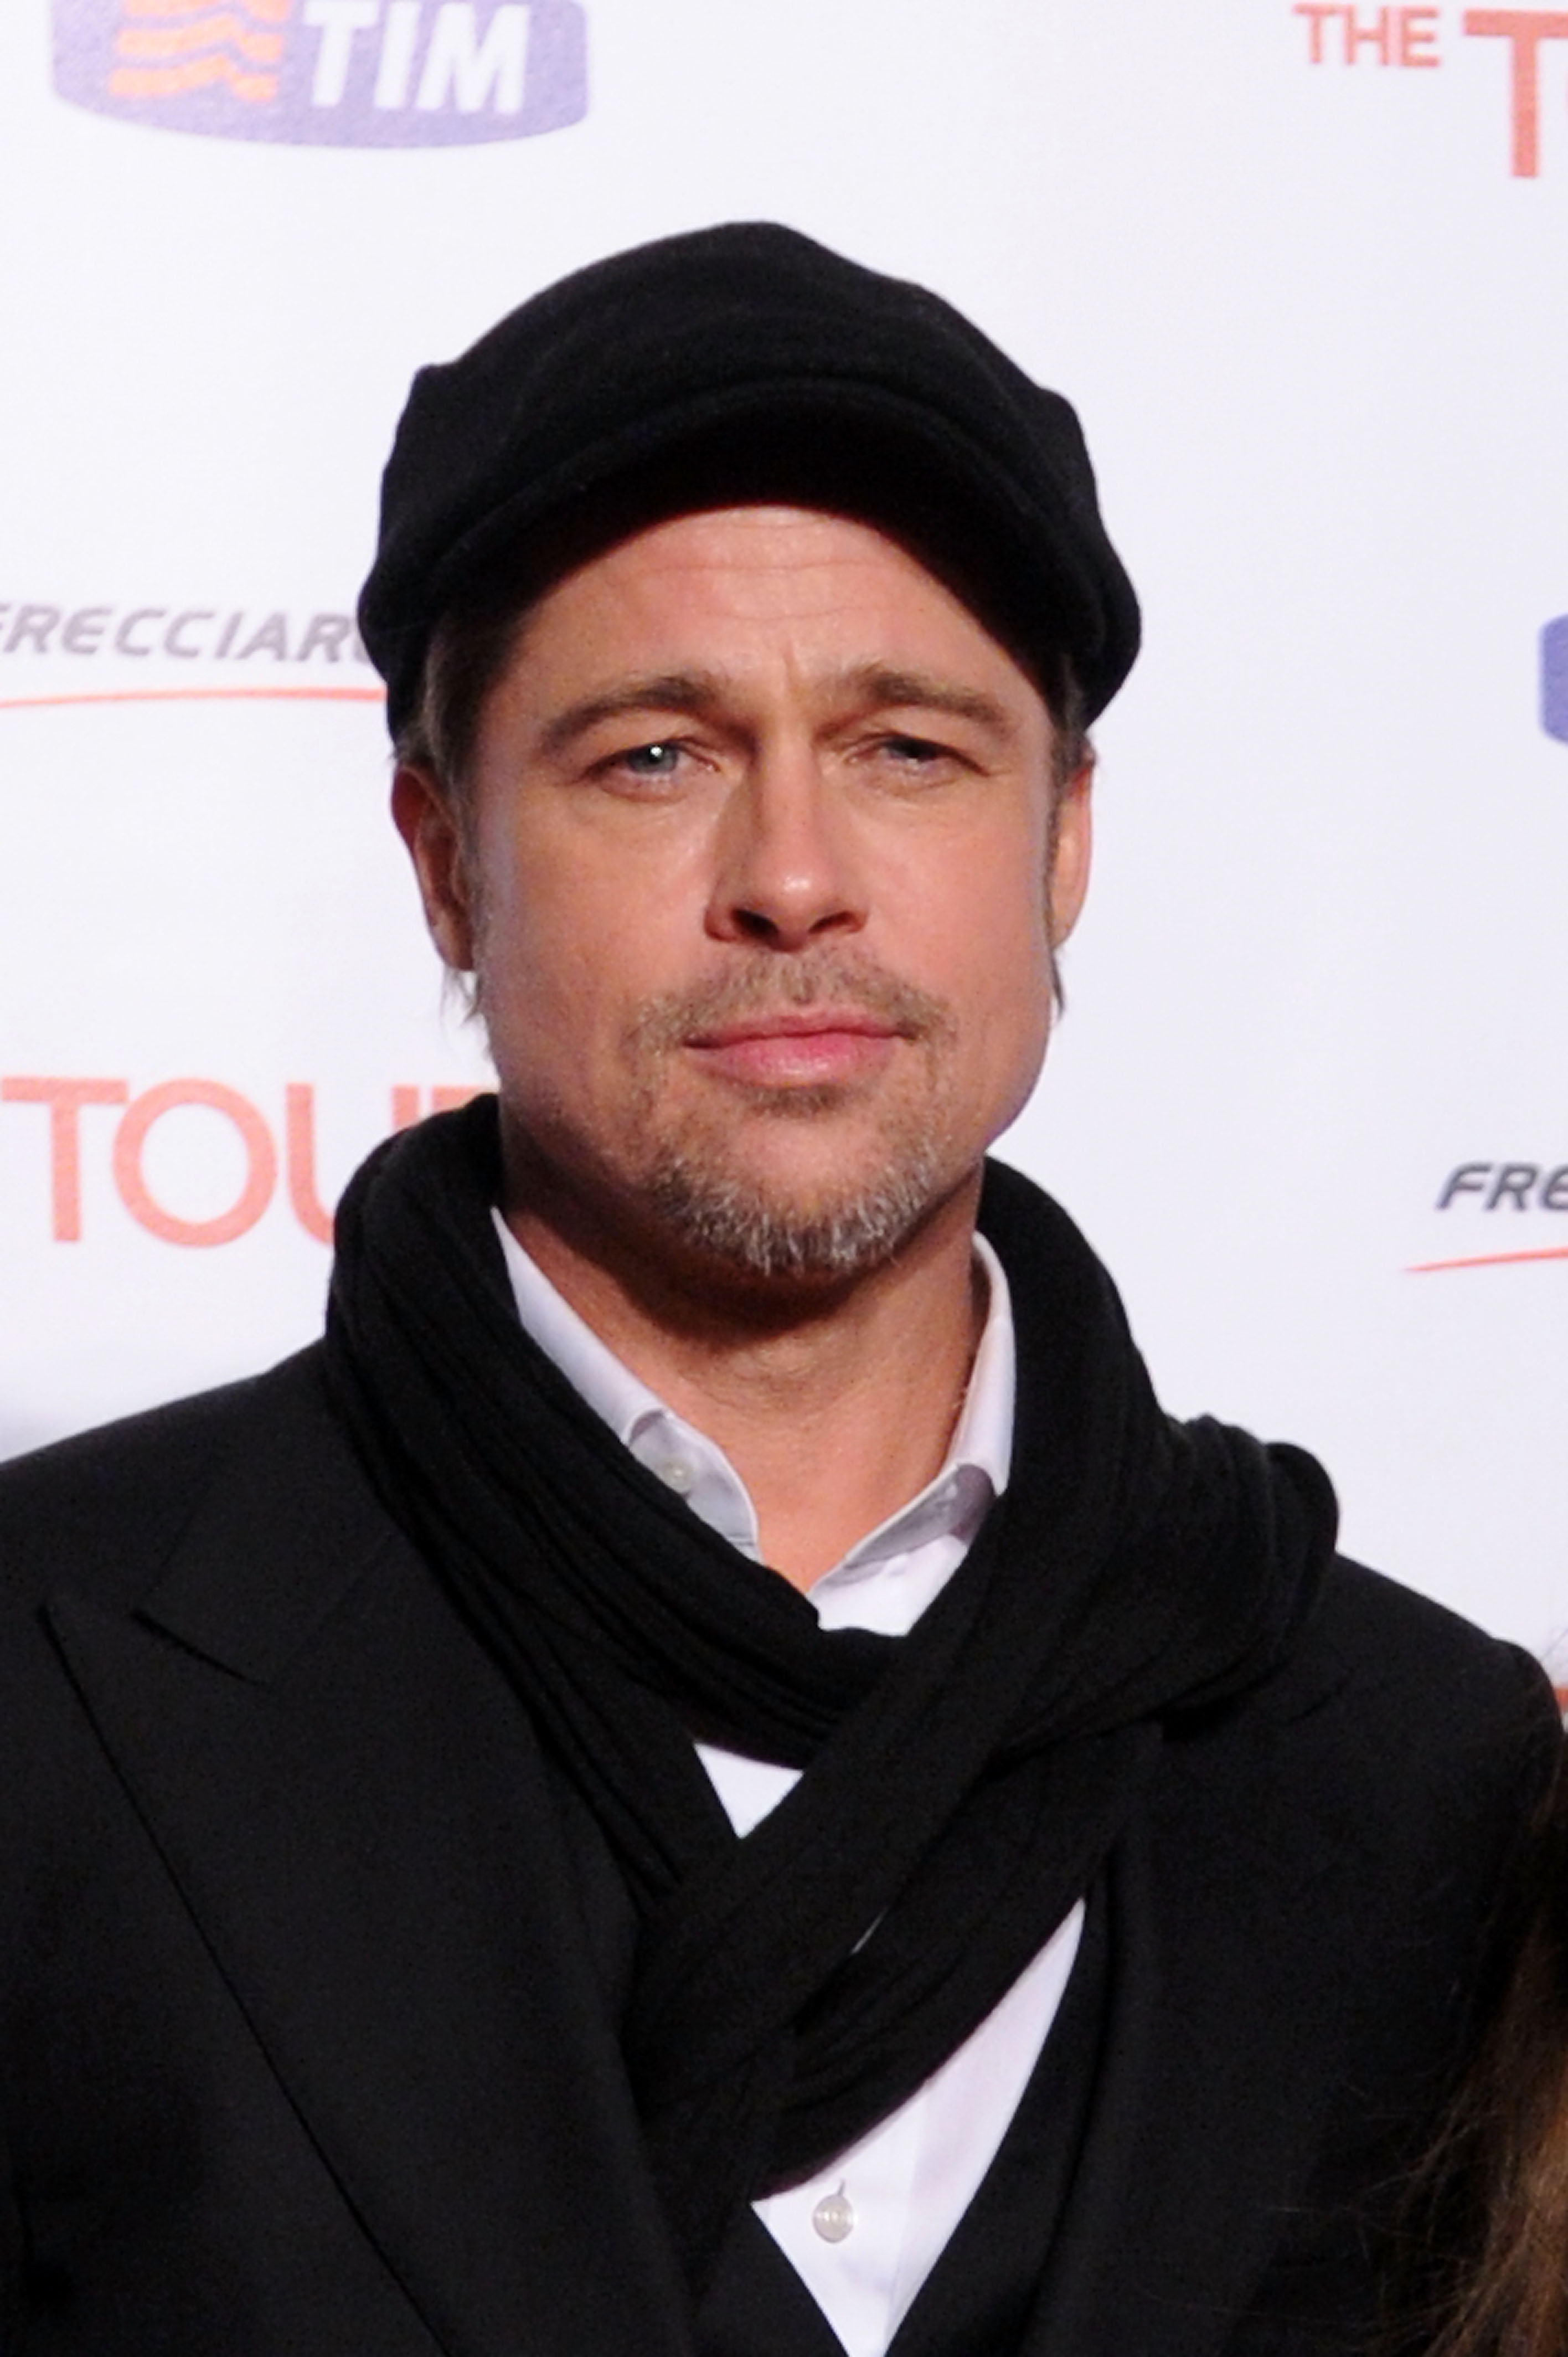 Brad in black hat and scarf with a casual suit at a media event